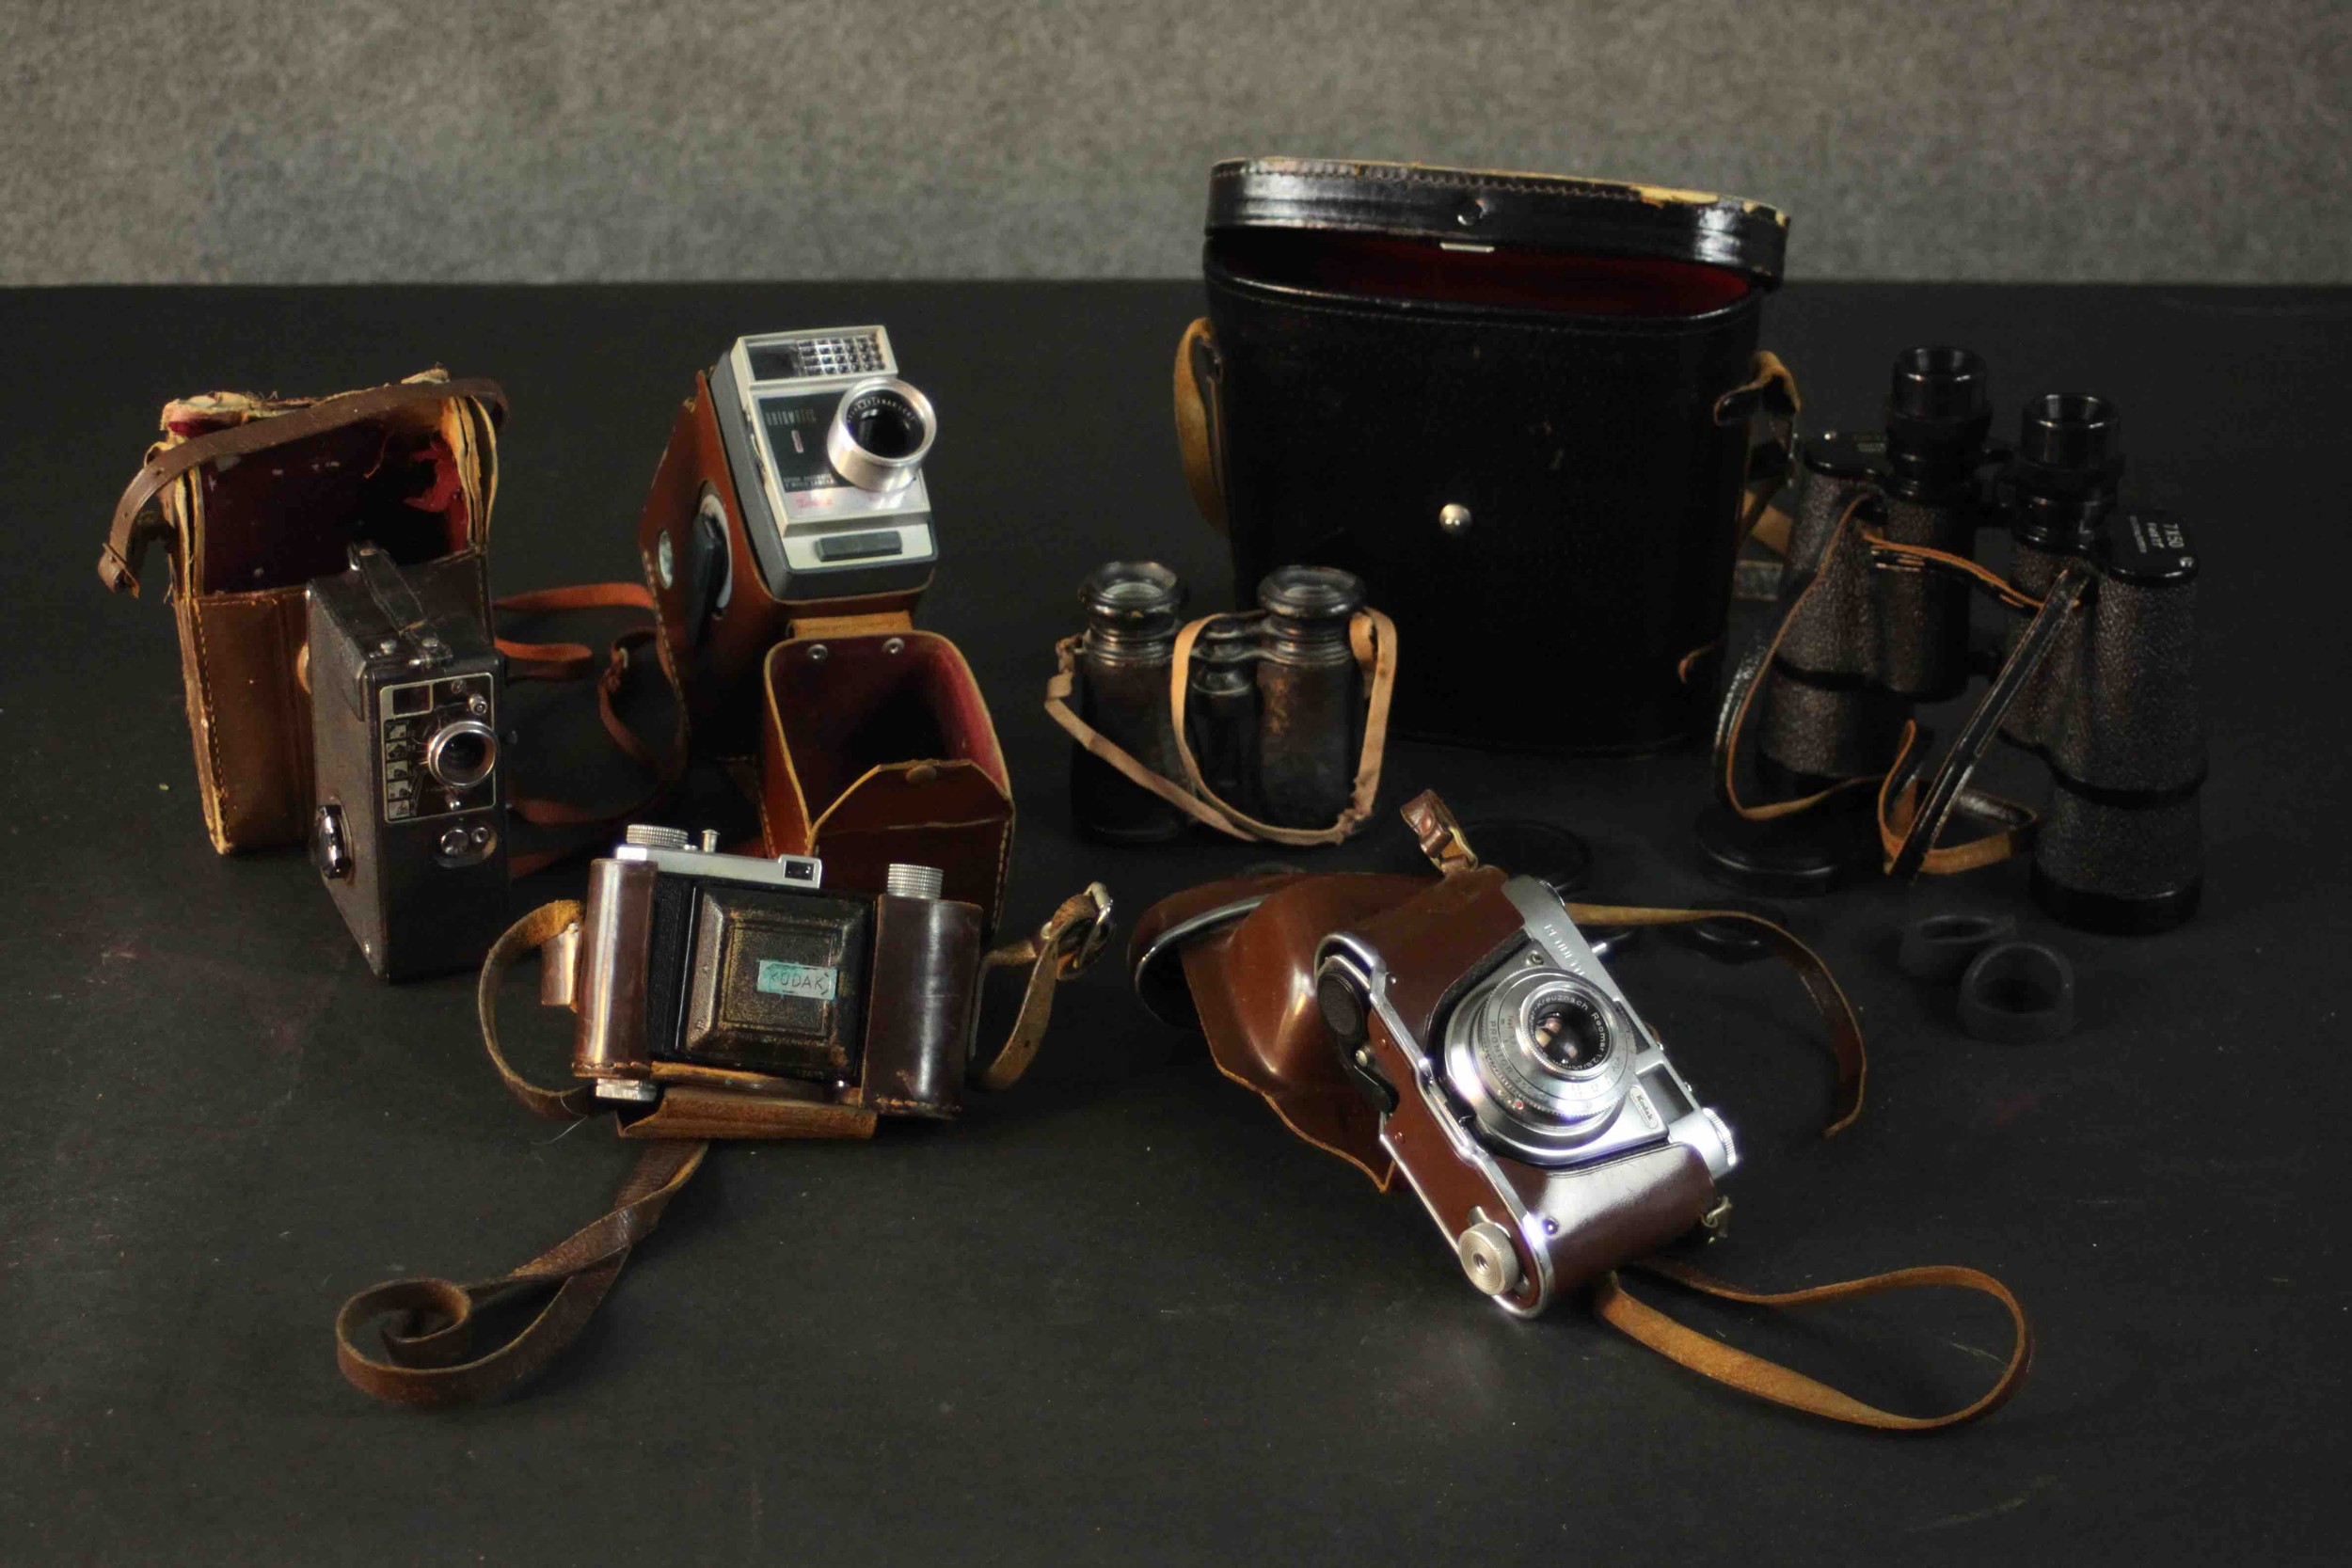 A collection of four vintage cameras. A Kodak Retinette 1A, Kodak Automatic 8, and two pairs of